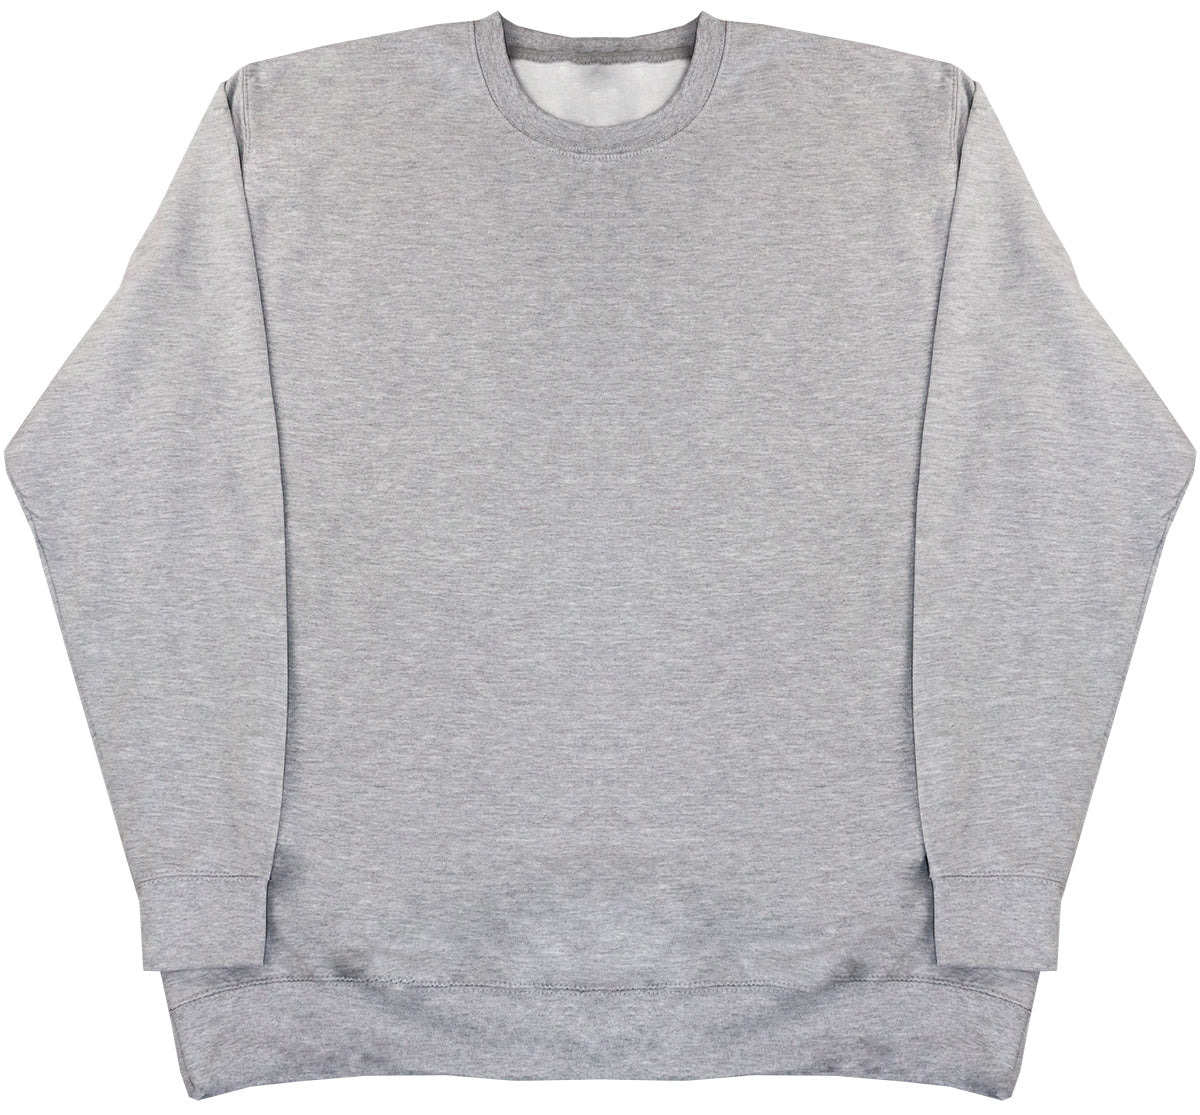 Personalised Sweater - Choice of Fonts - White Text - Huge Oversized Comfy Original Sweater